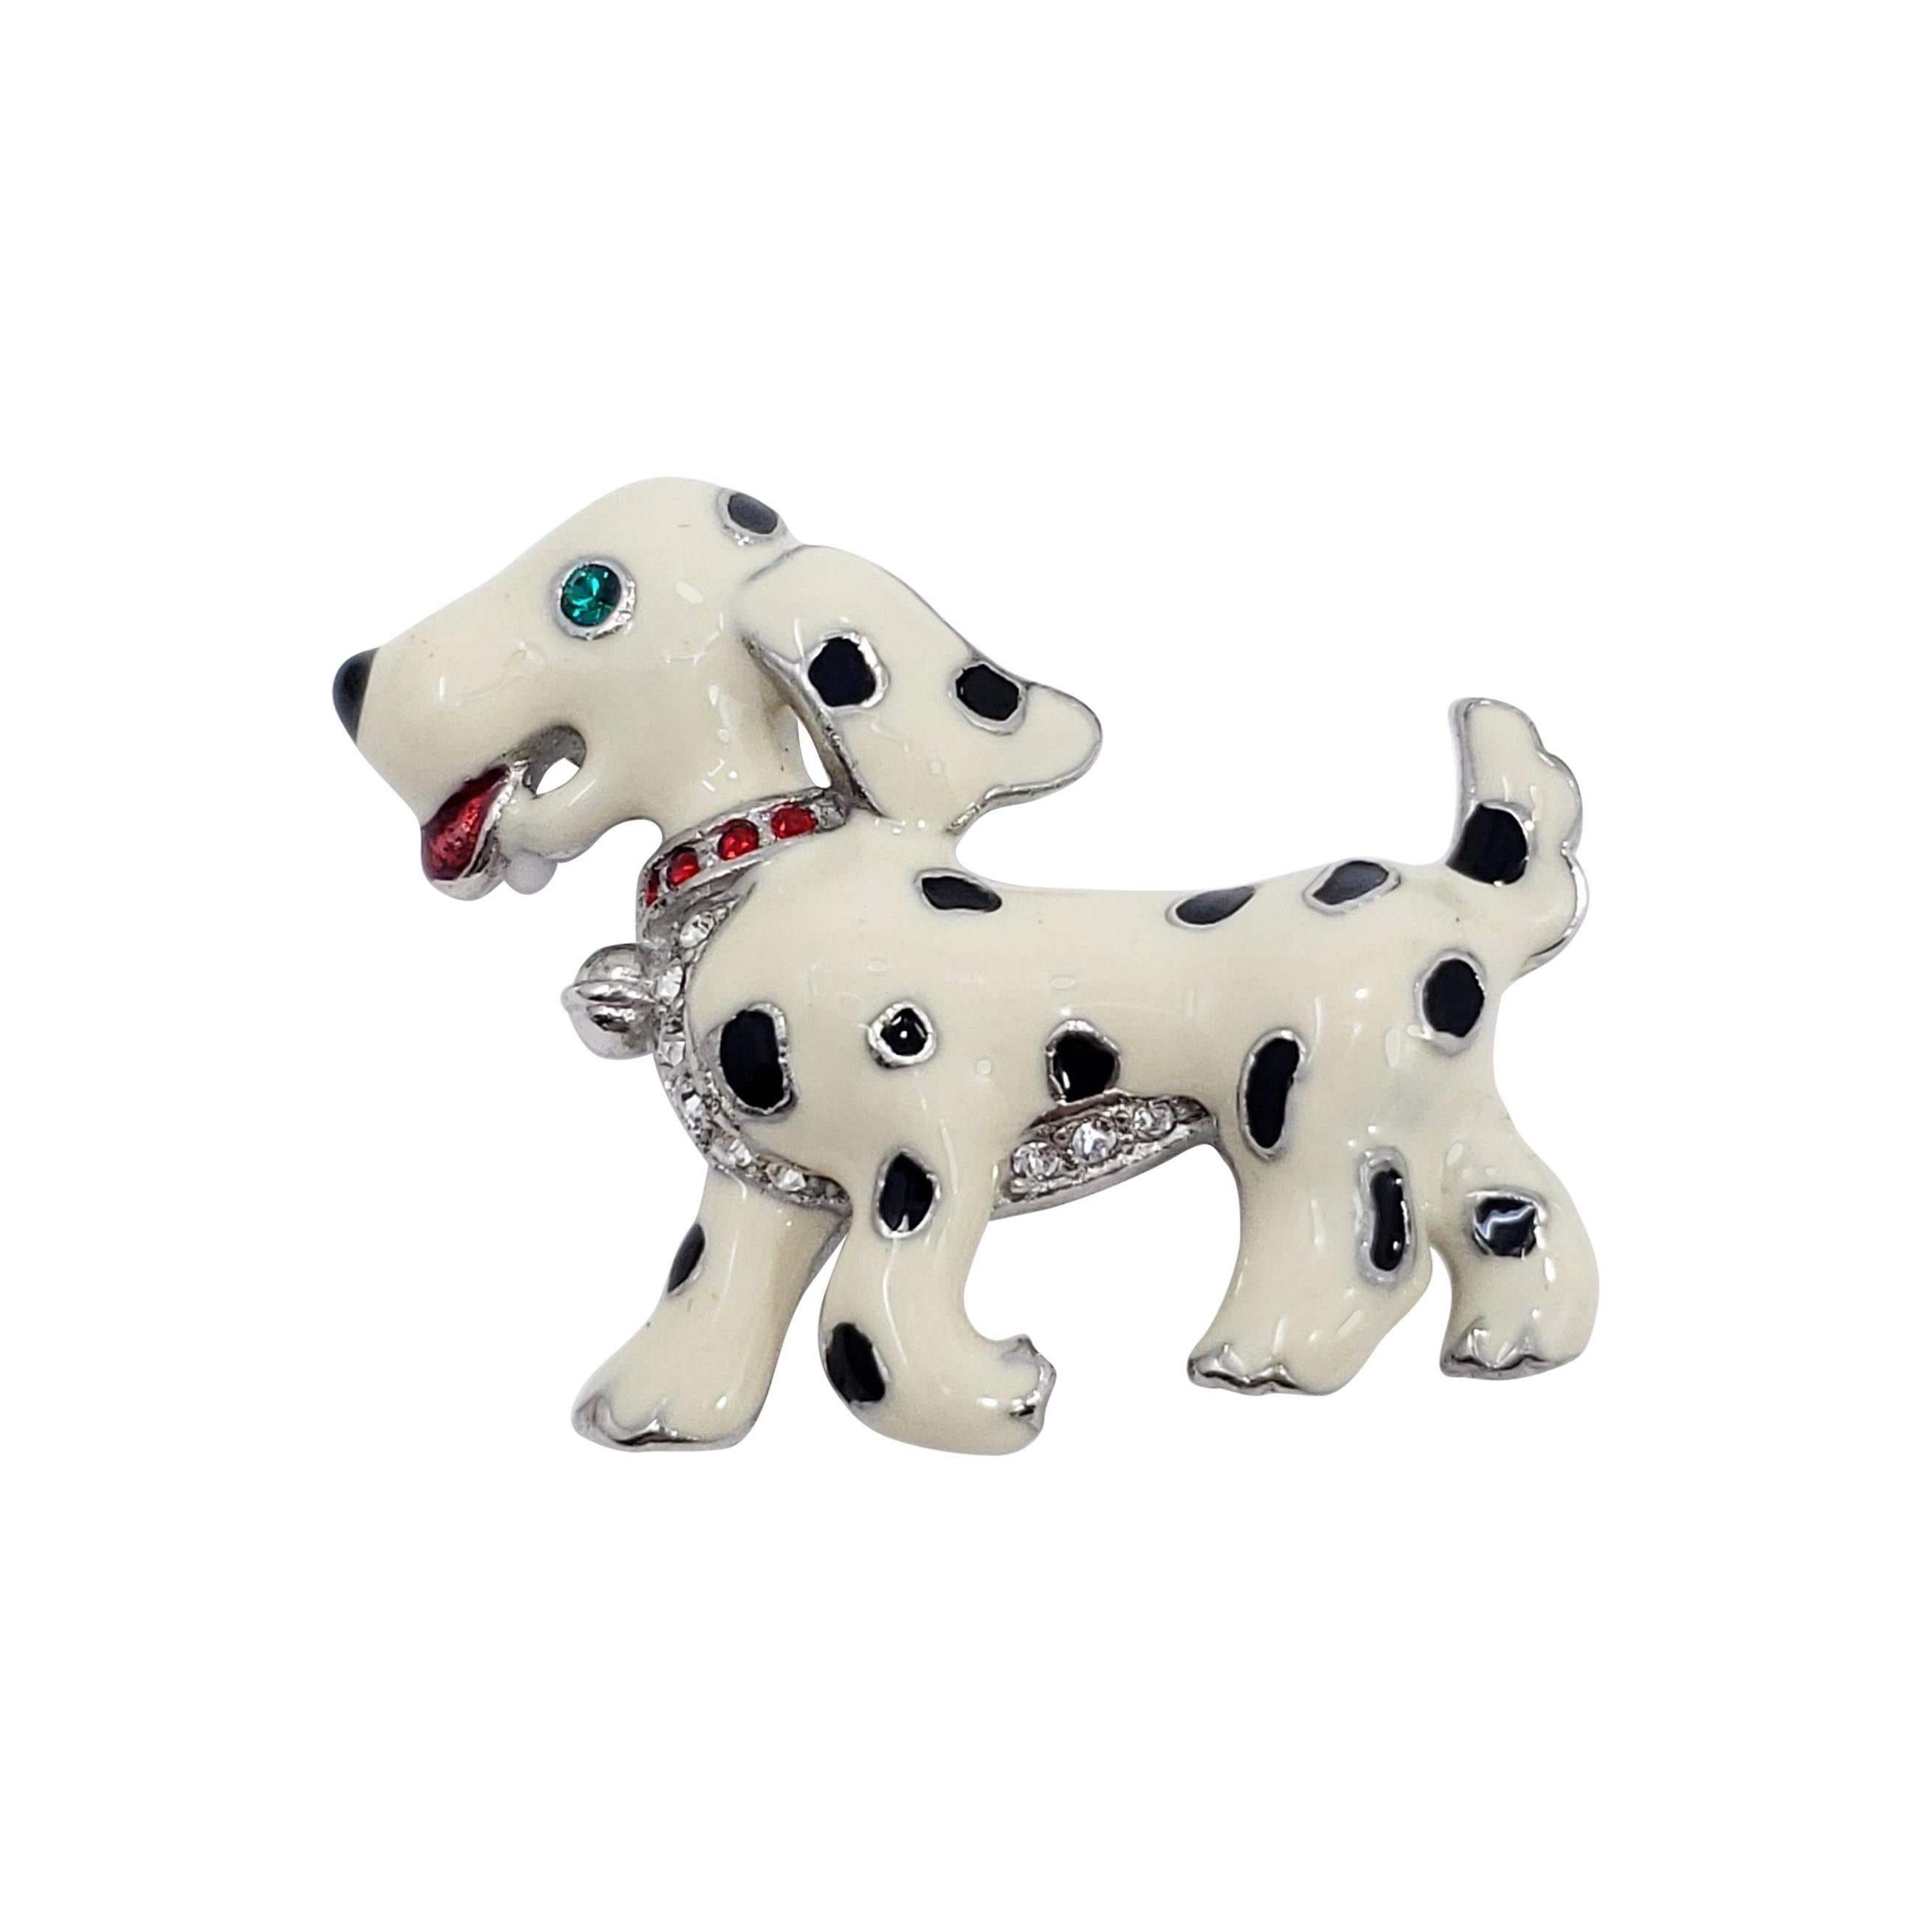 Dalmatian Pup Pin Brooch, Black and White Enamel with Crystals, Late 1900s